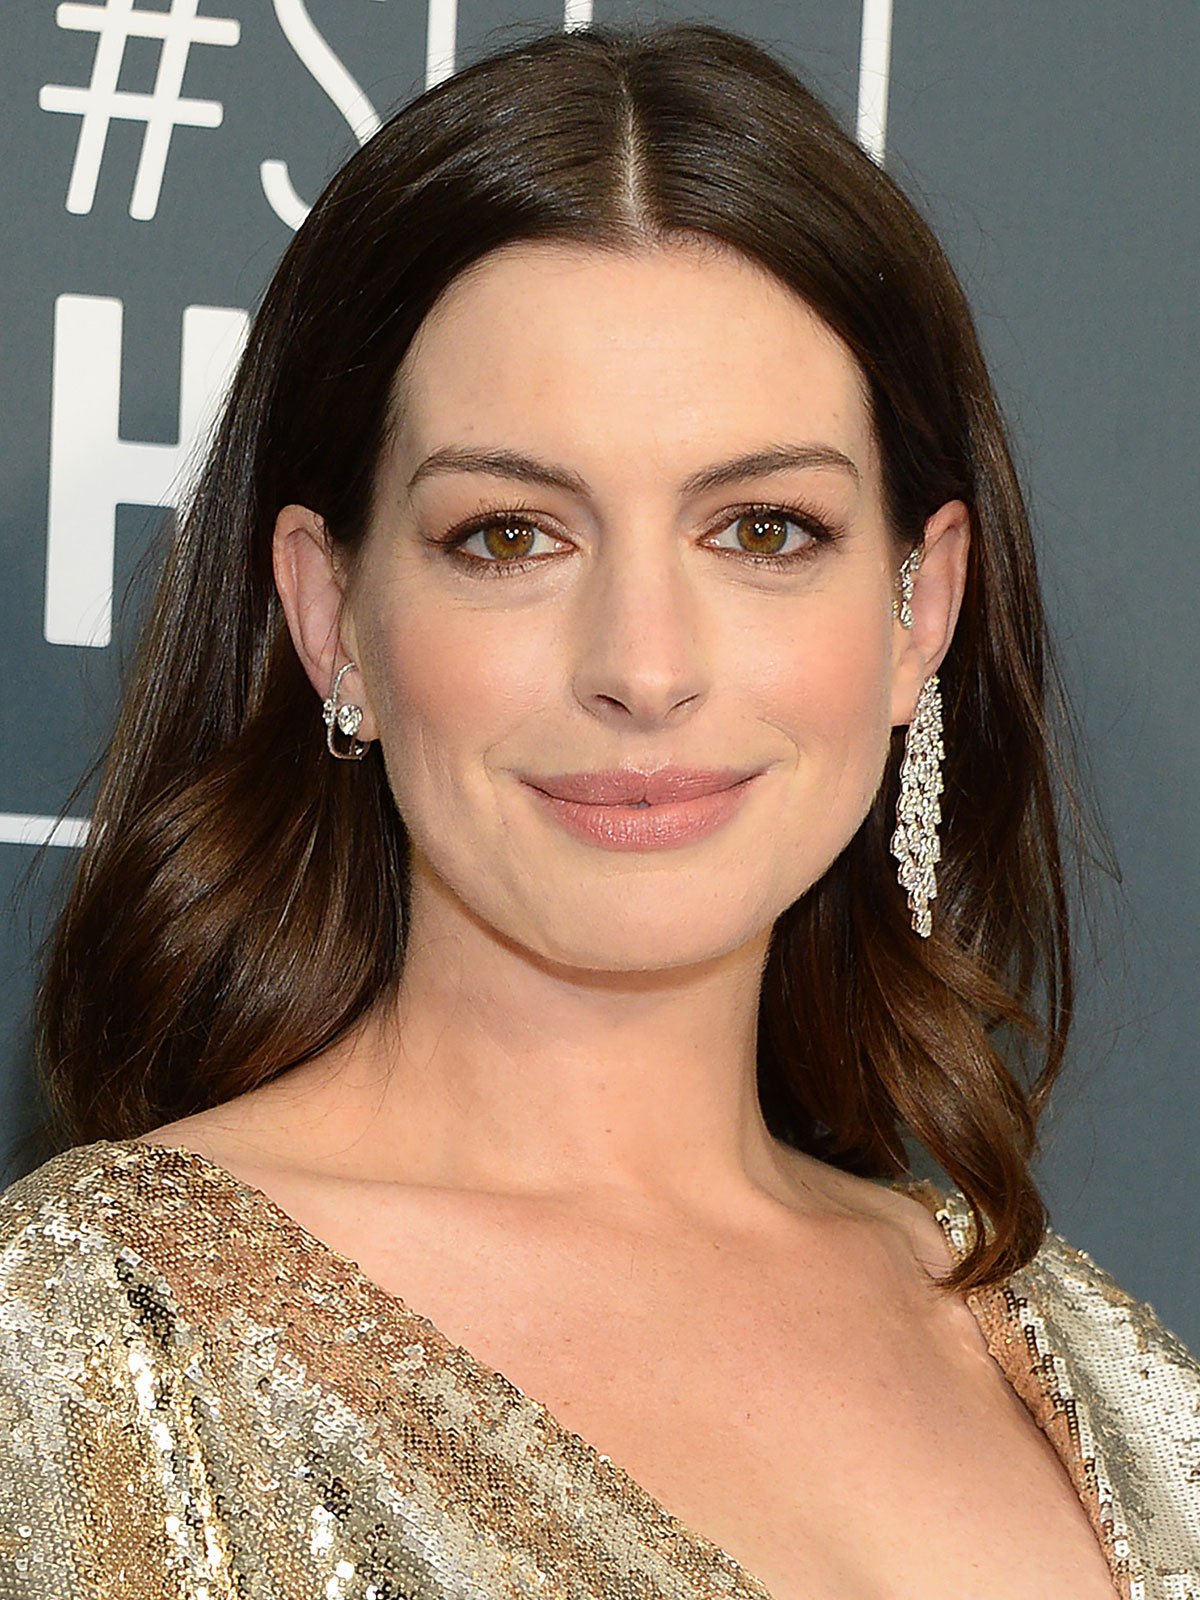 Anne Hathaway [Instyle, March 2010 Issue]